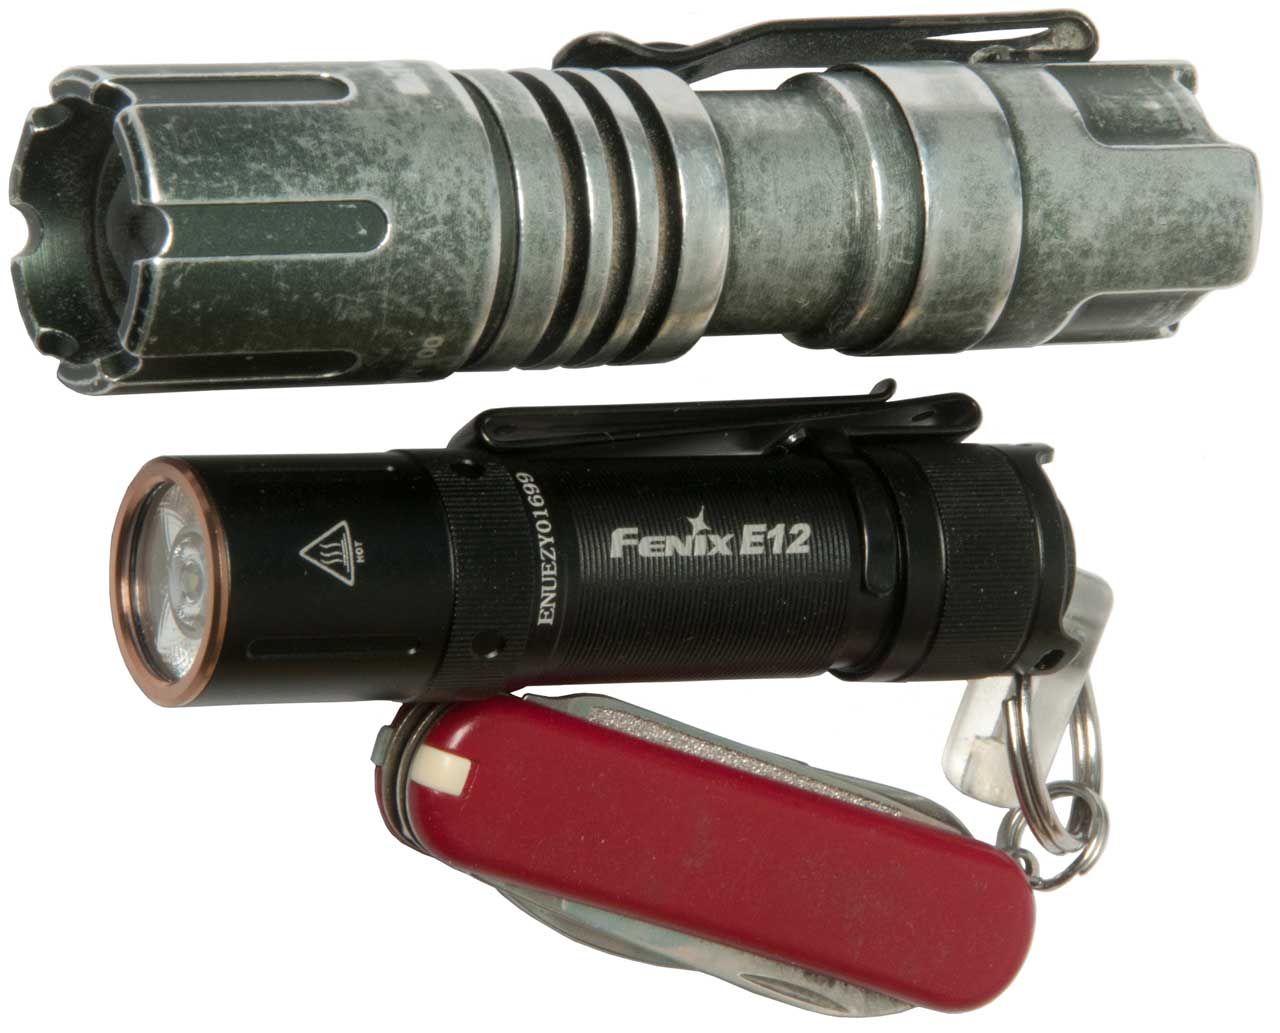 The Best Hand-Crank Flashlight Options for Light in Emergency Situations -  Bob Vila